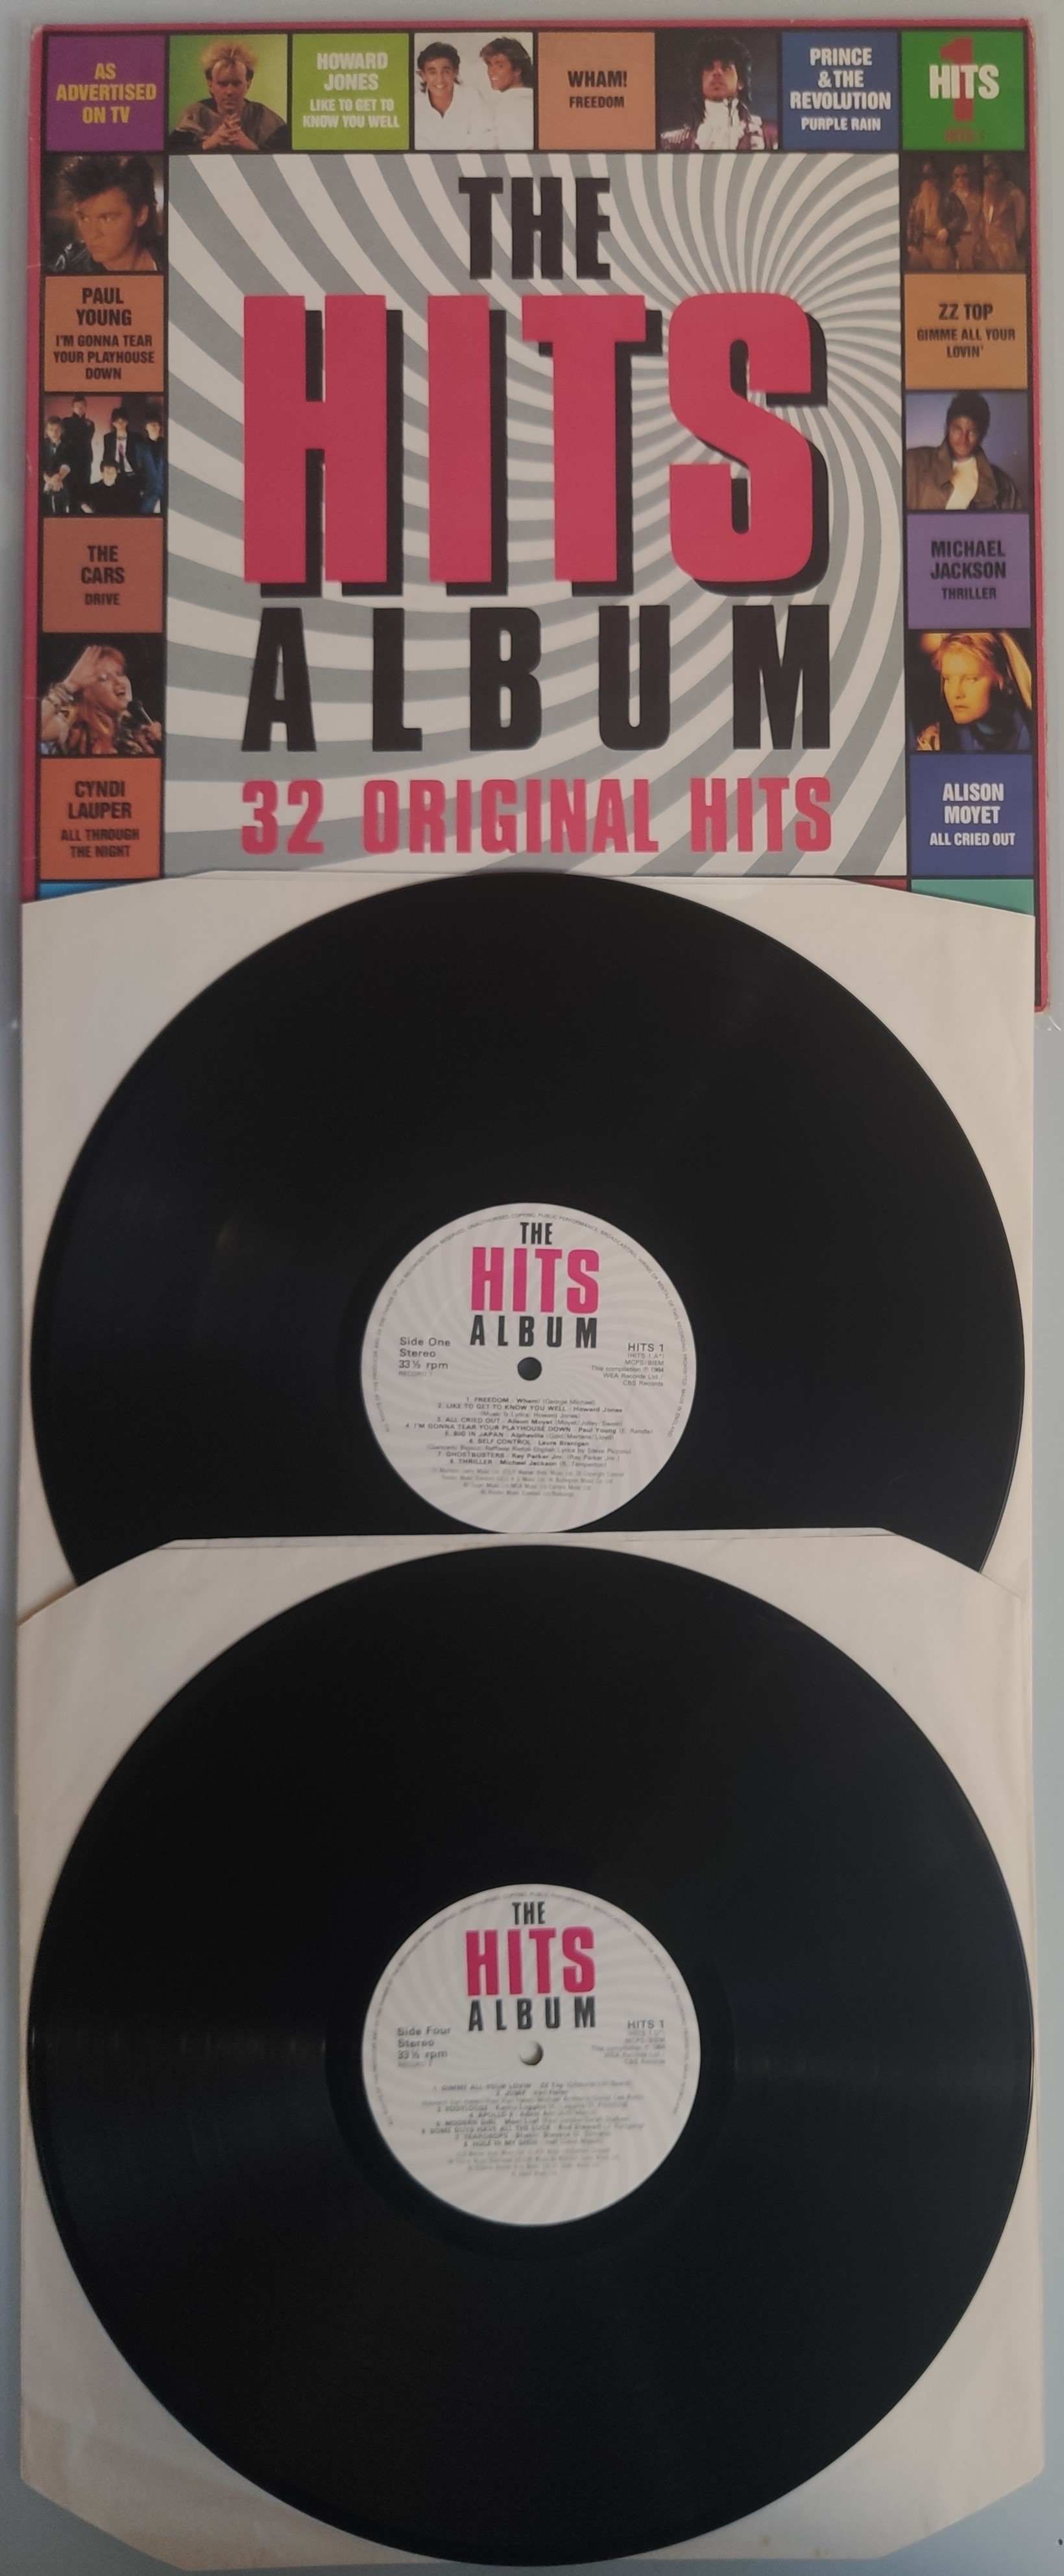 3 x The Hits Double LPs and Box Set – All UK First Pressings. VG+ To EX Condition. - Image 3 of 4